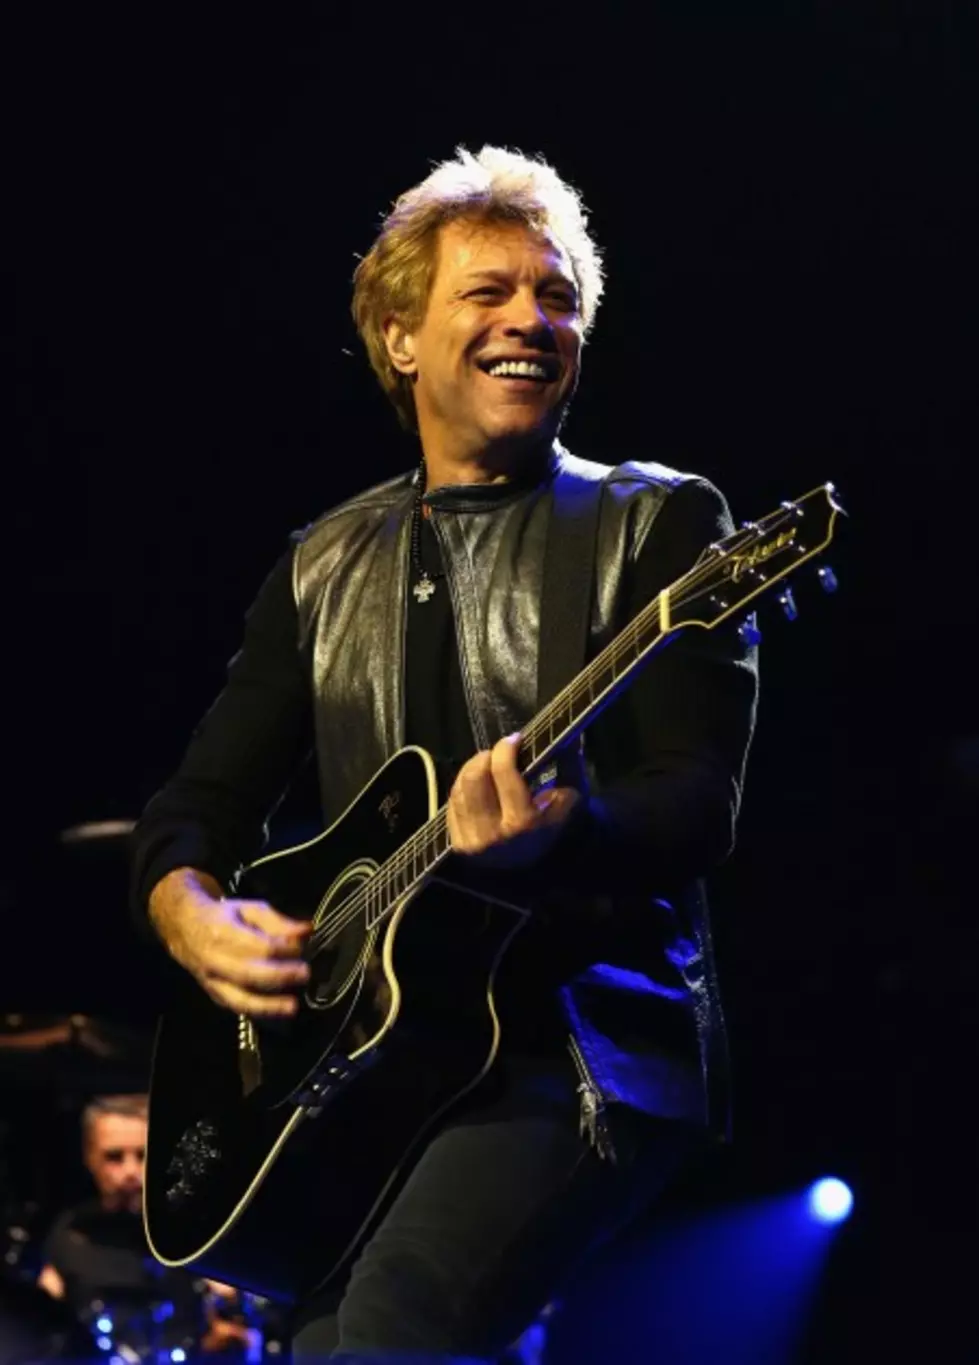 Watch A Behind The Scenes Bon Jovi Documentary Online Today [VIDEO]